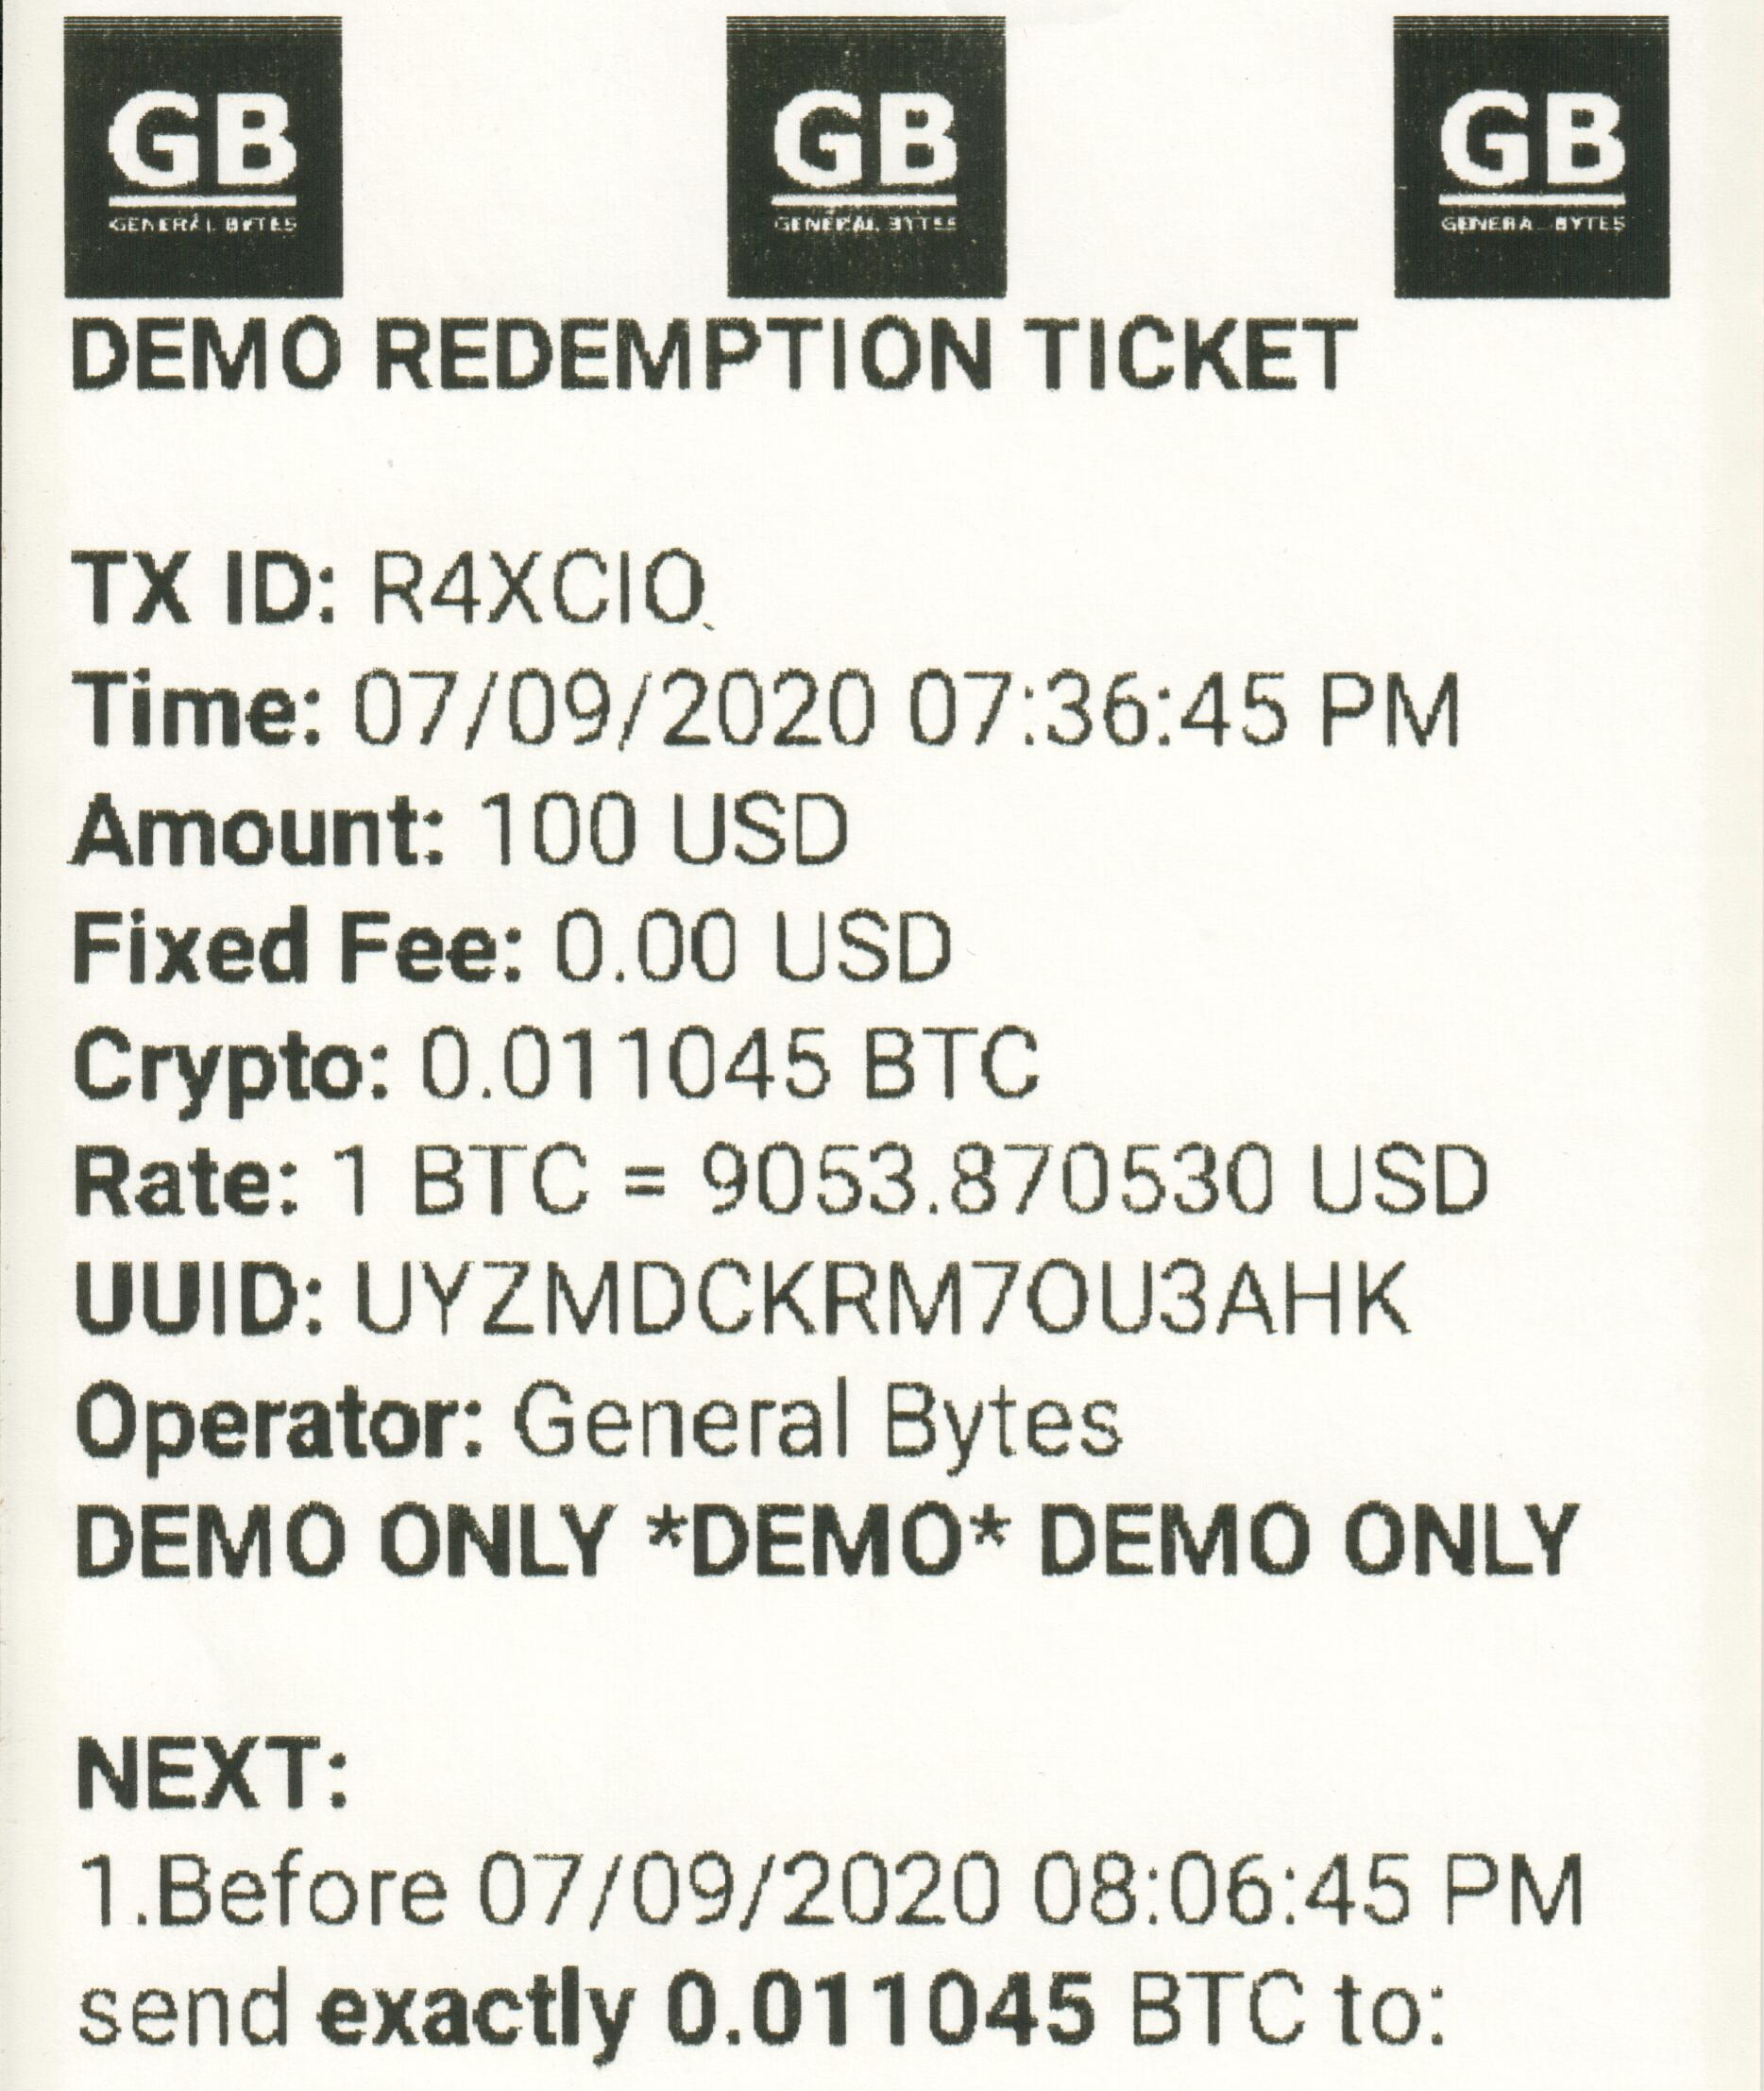 Typical redemption ticket showing the precise amount and expiration time.